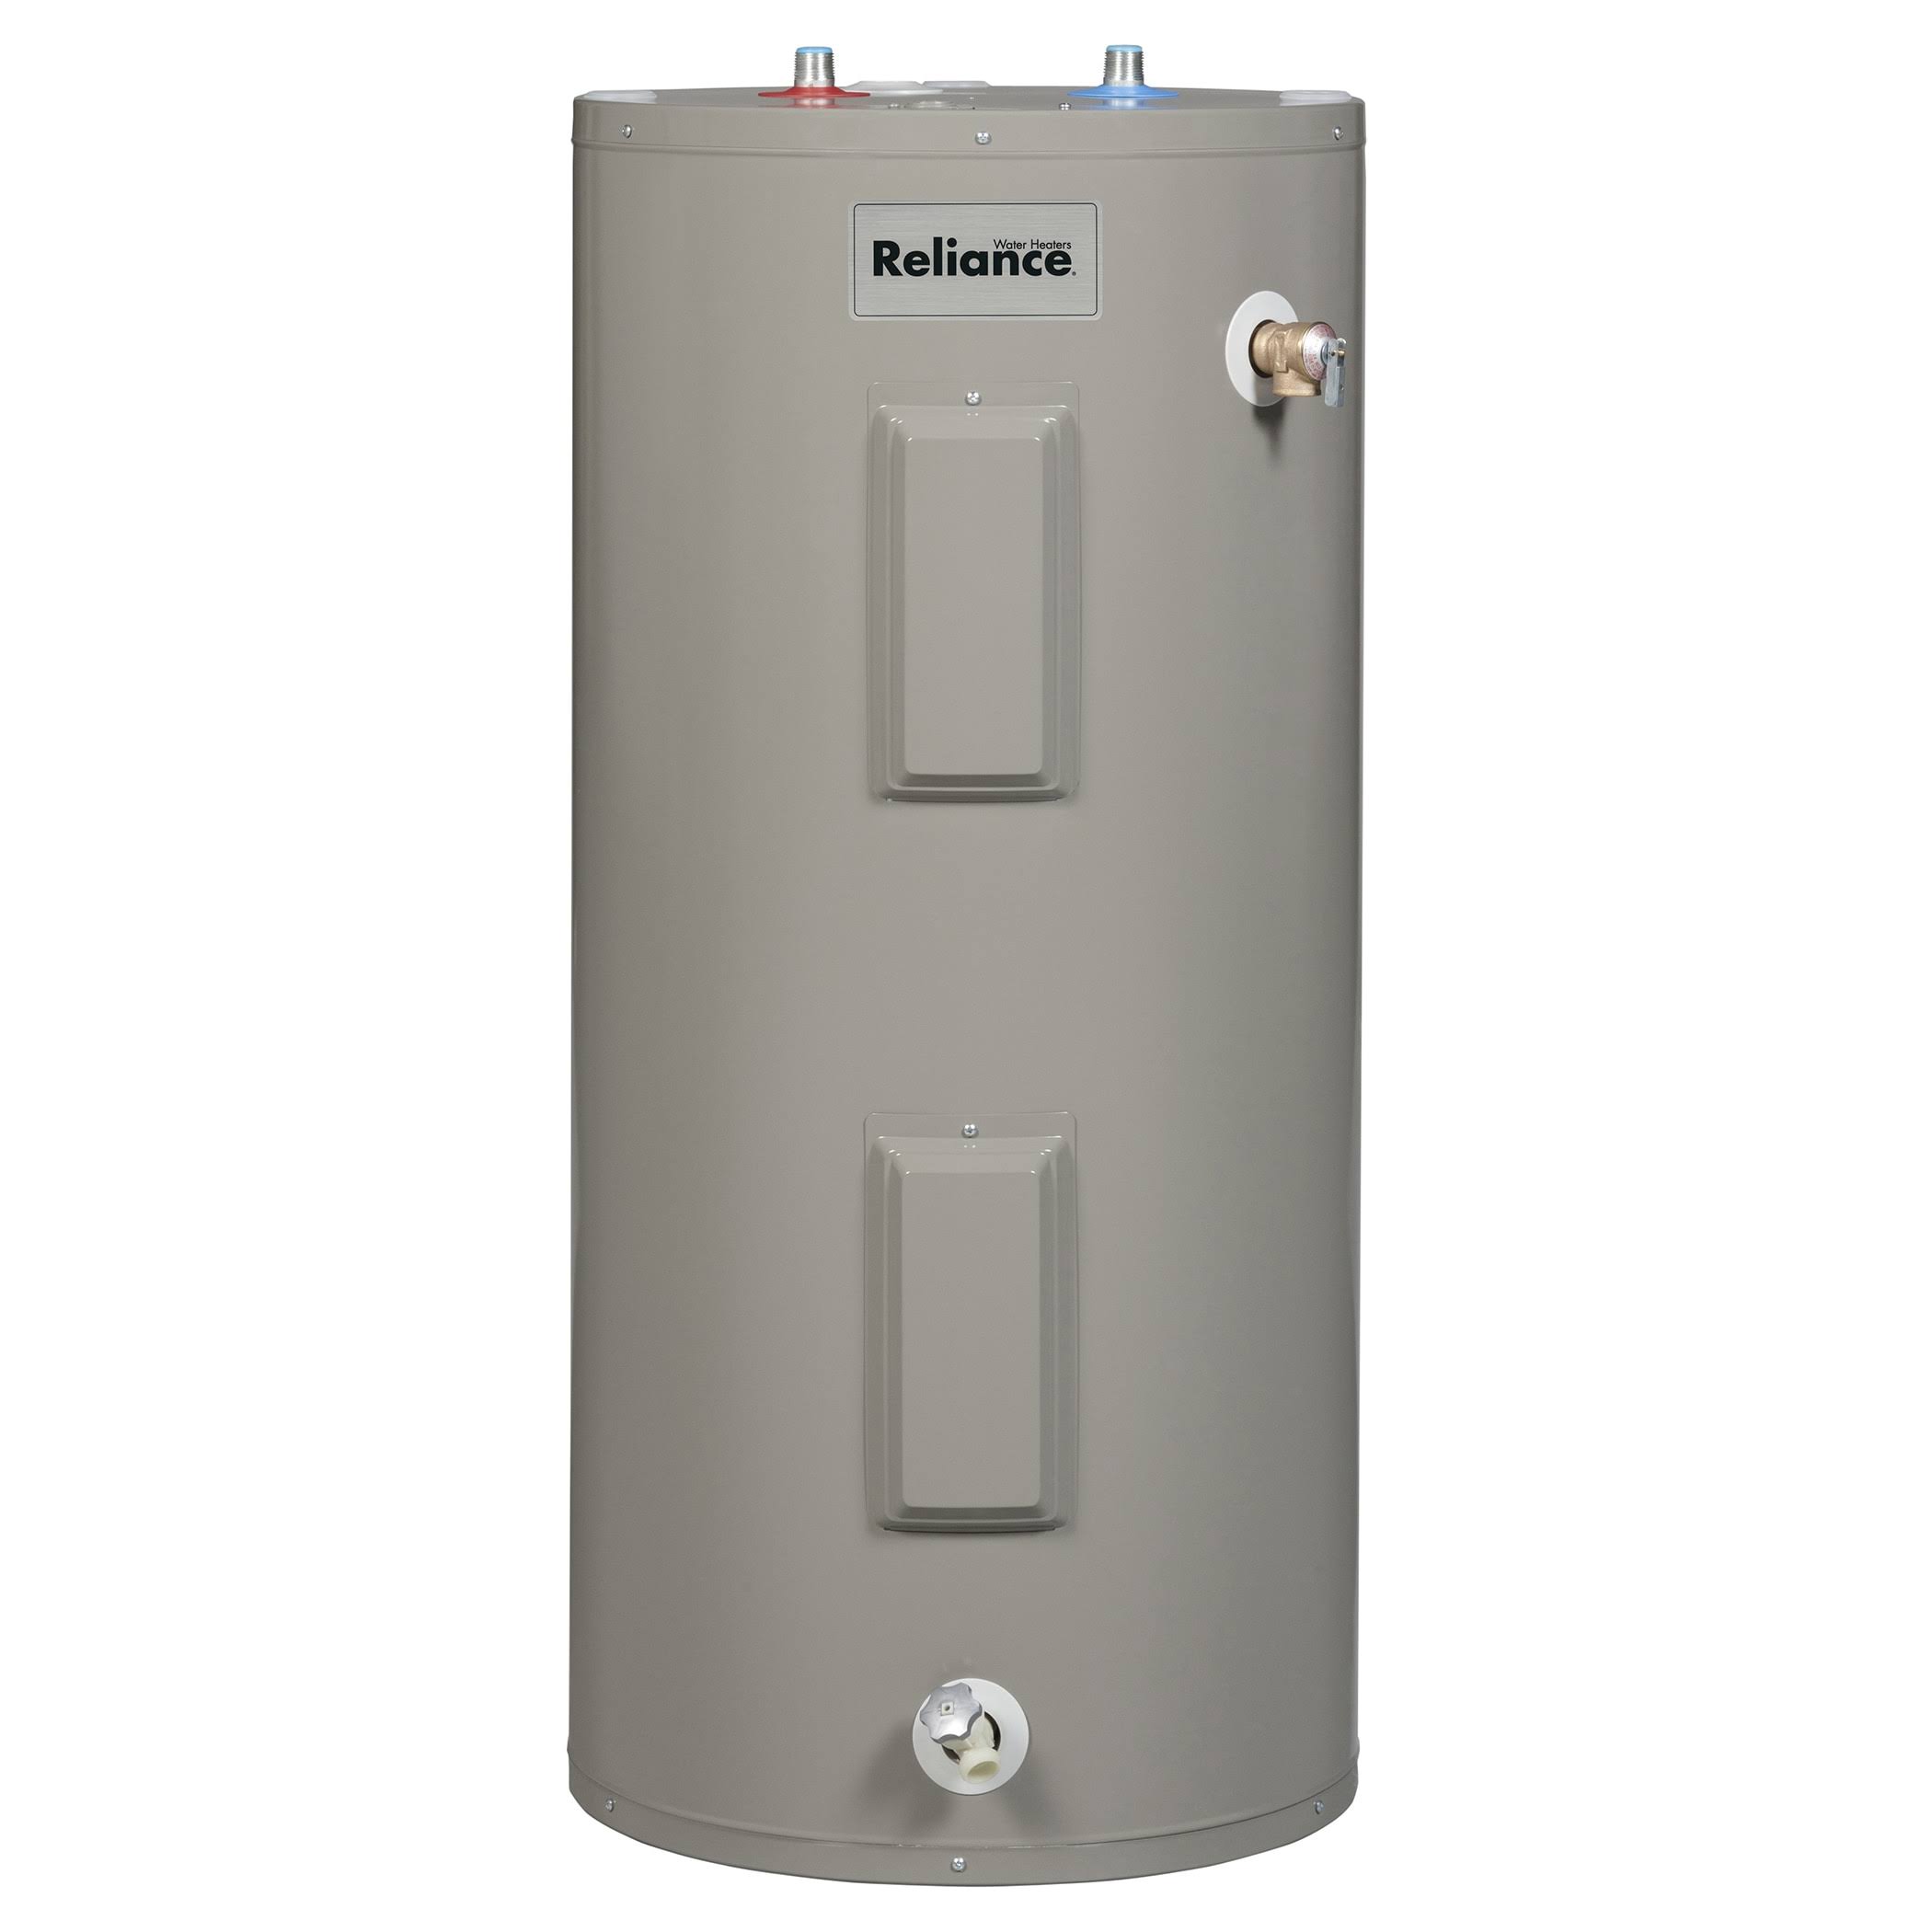 Reliance Standard Electric Water Heater - 40gal